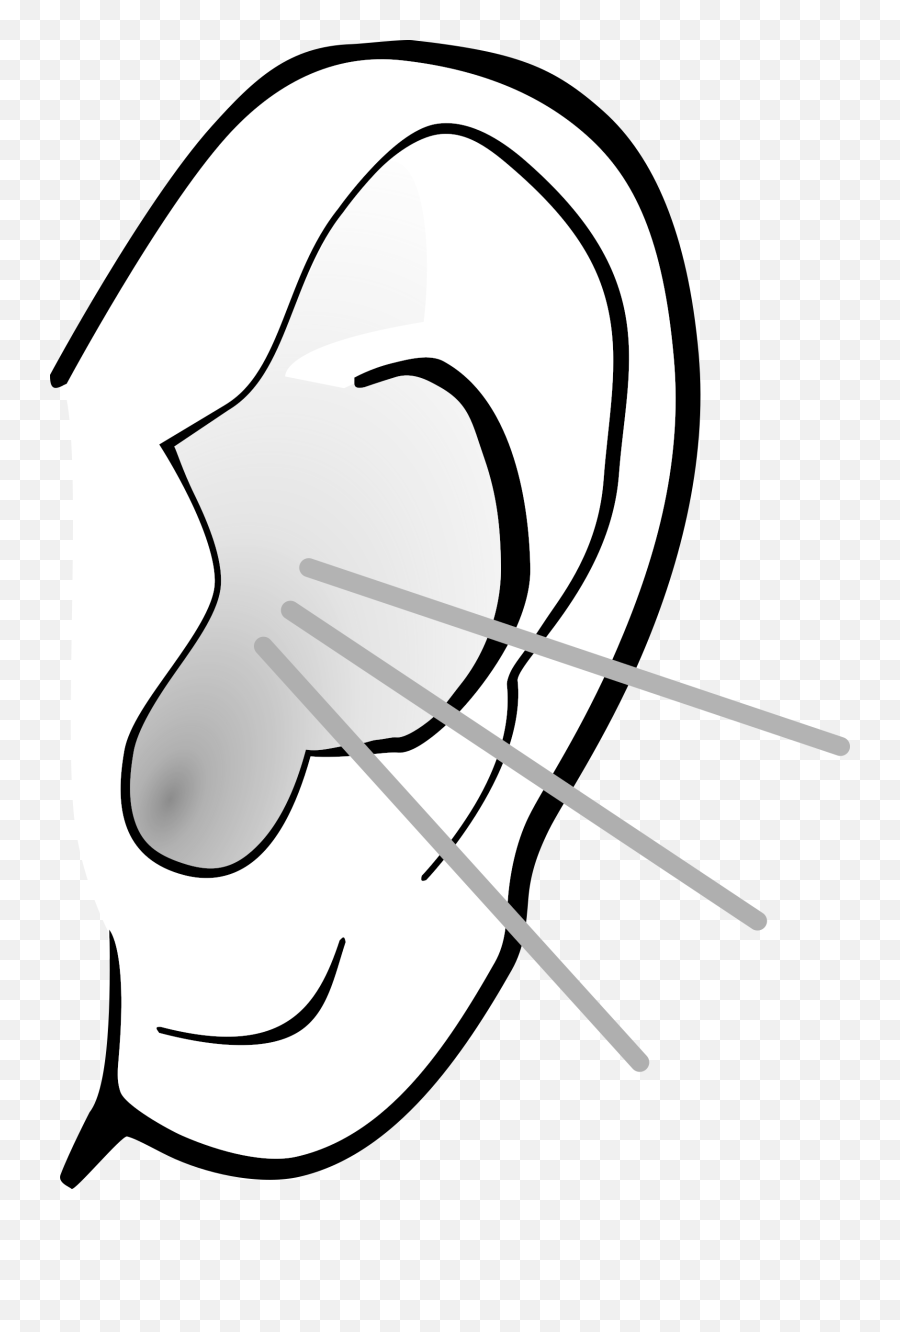 Download Free Png Espn File - Dlpngcom Listening Ear Clipart Black And White,Ear Png